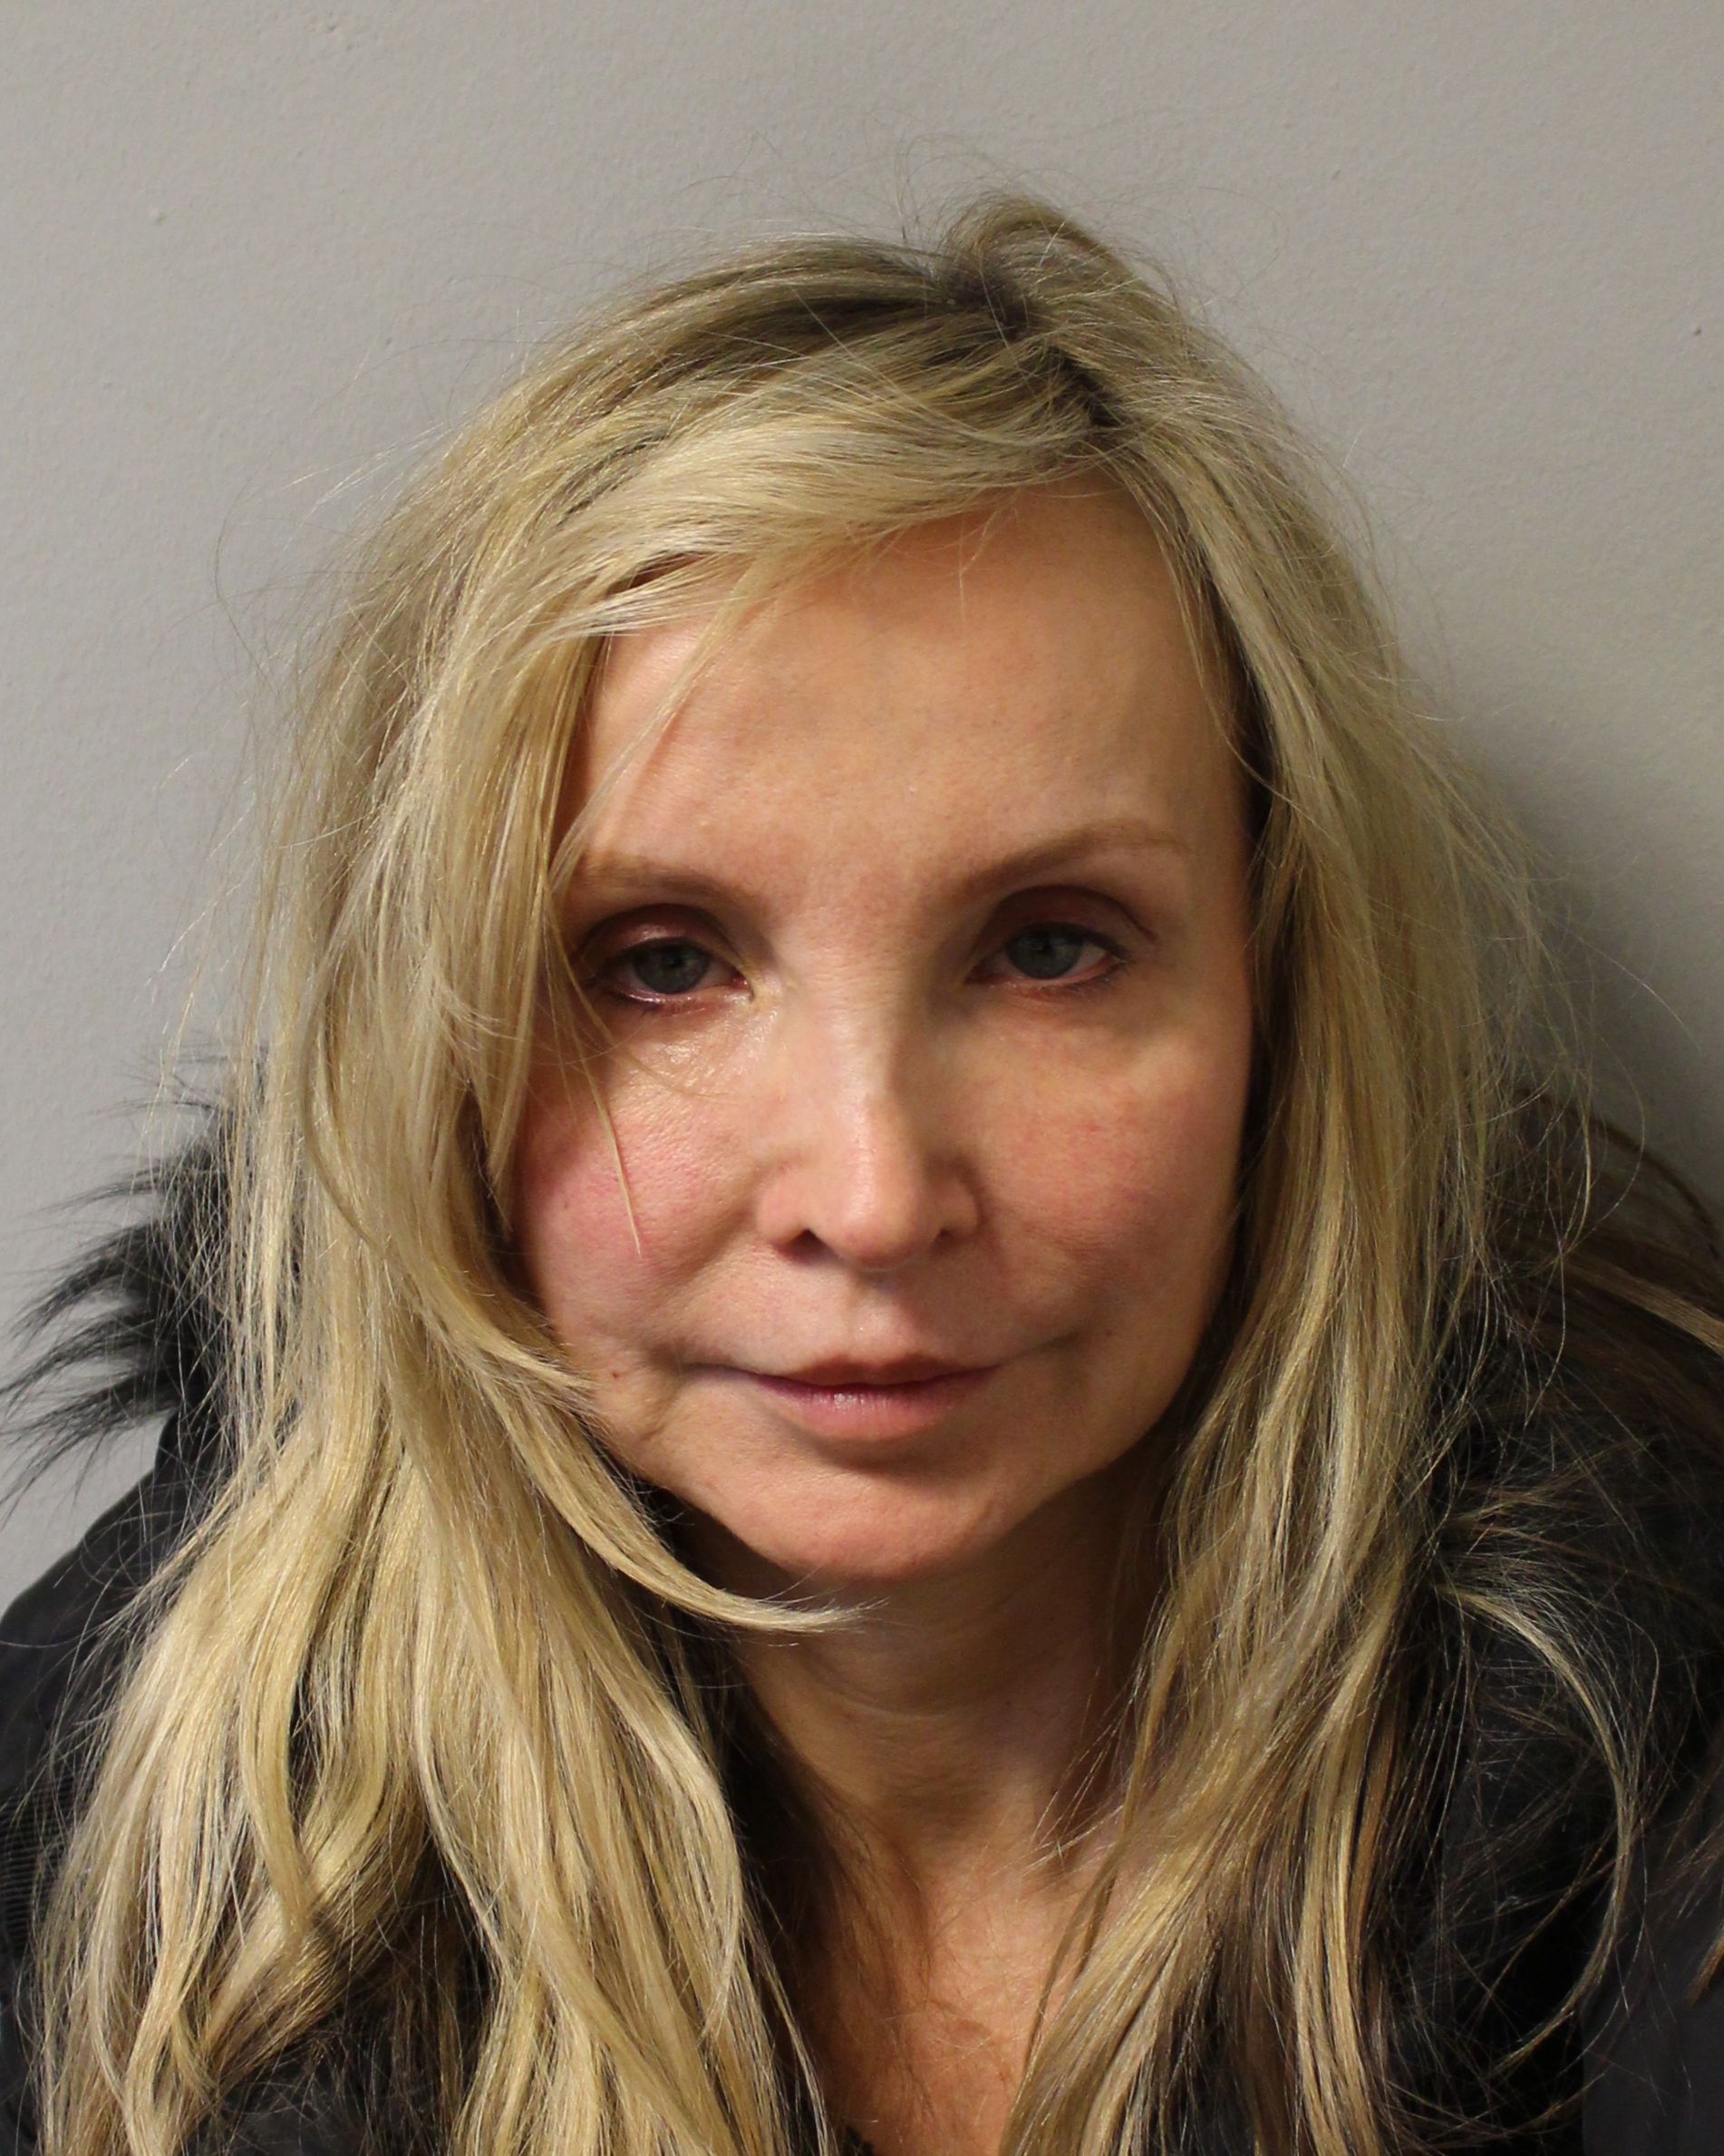 A mugshot of Jane Clapton released by the Metropolitan Police